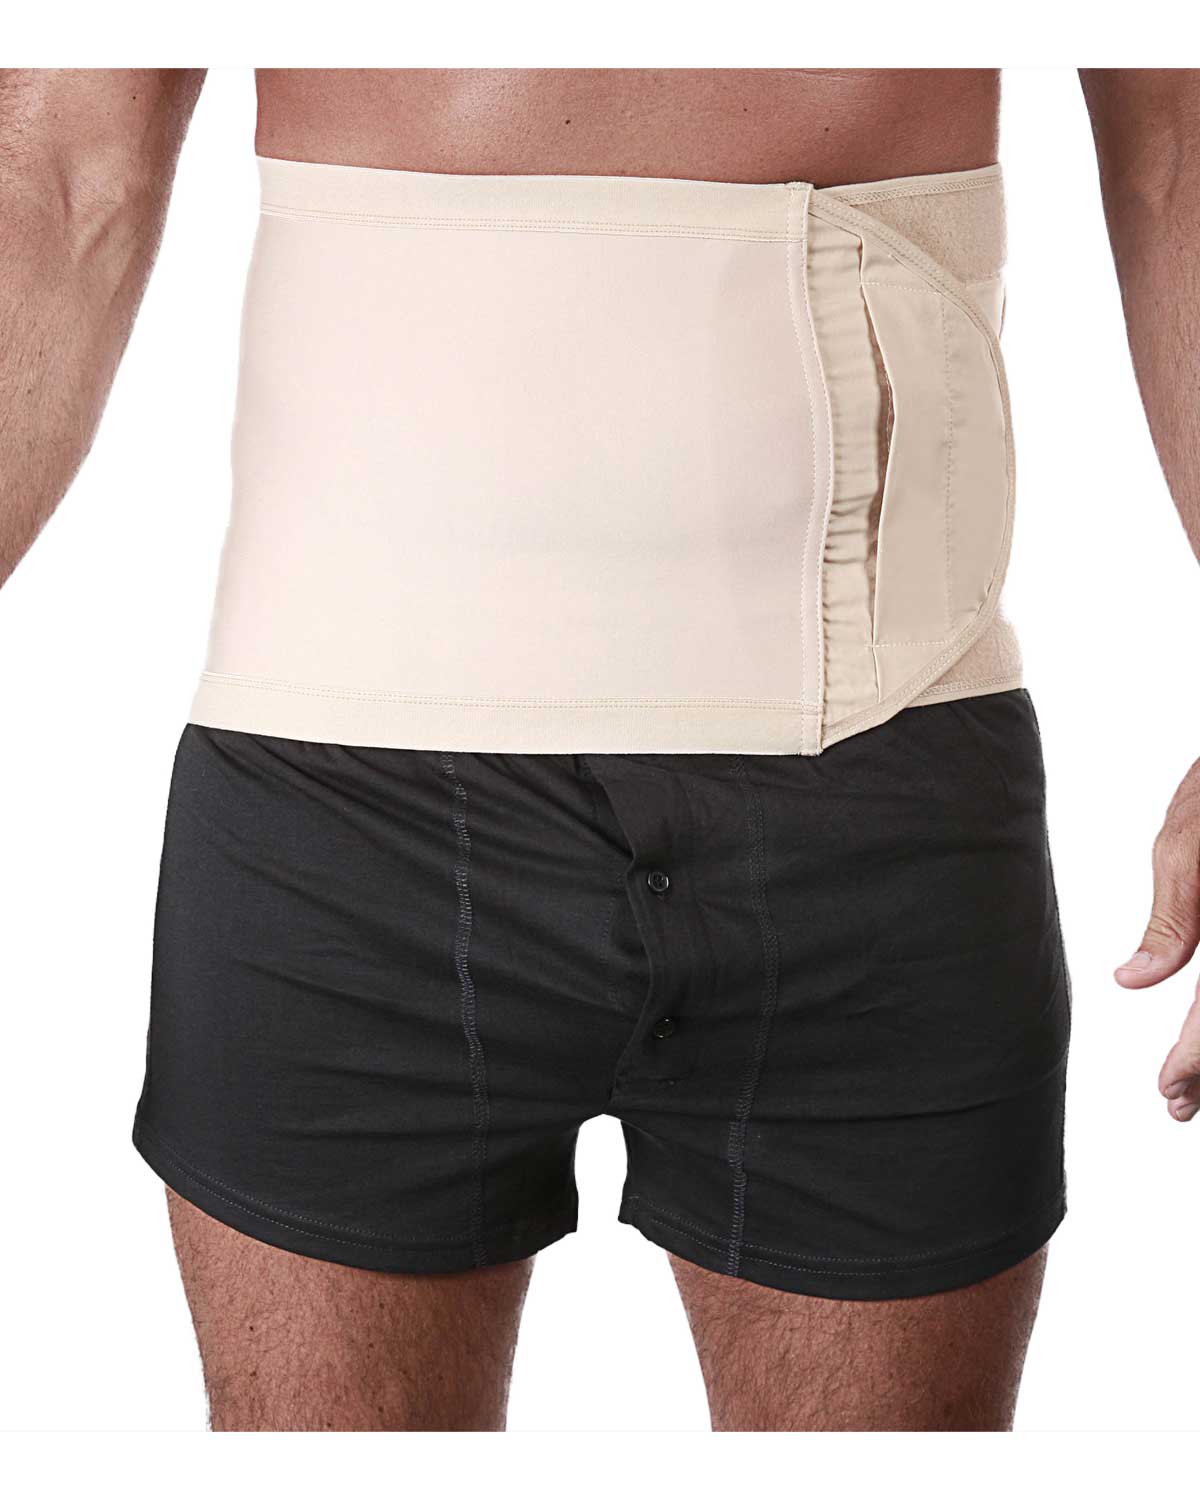 CUI Unisex Anti Roll Wraparound Ostomy Hernia Support Belt - 16cm/6inch - 1 each, 16 CM / 6 INCH, SMALL - WHITE - NO OPENING